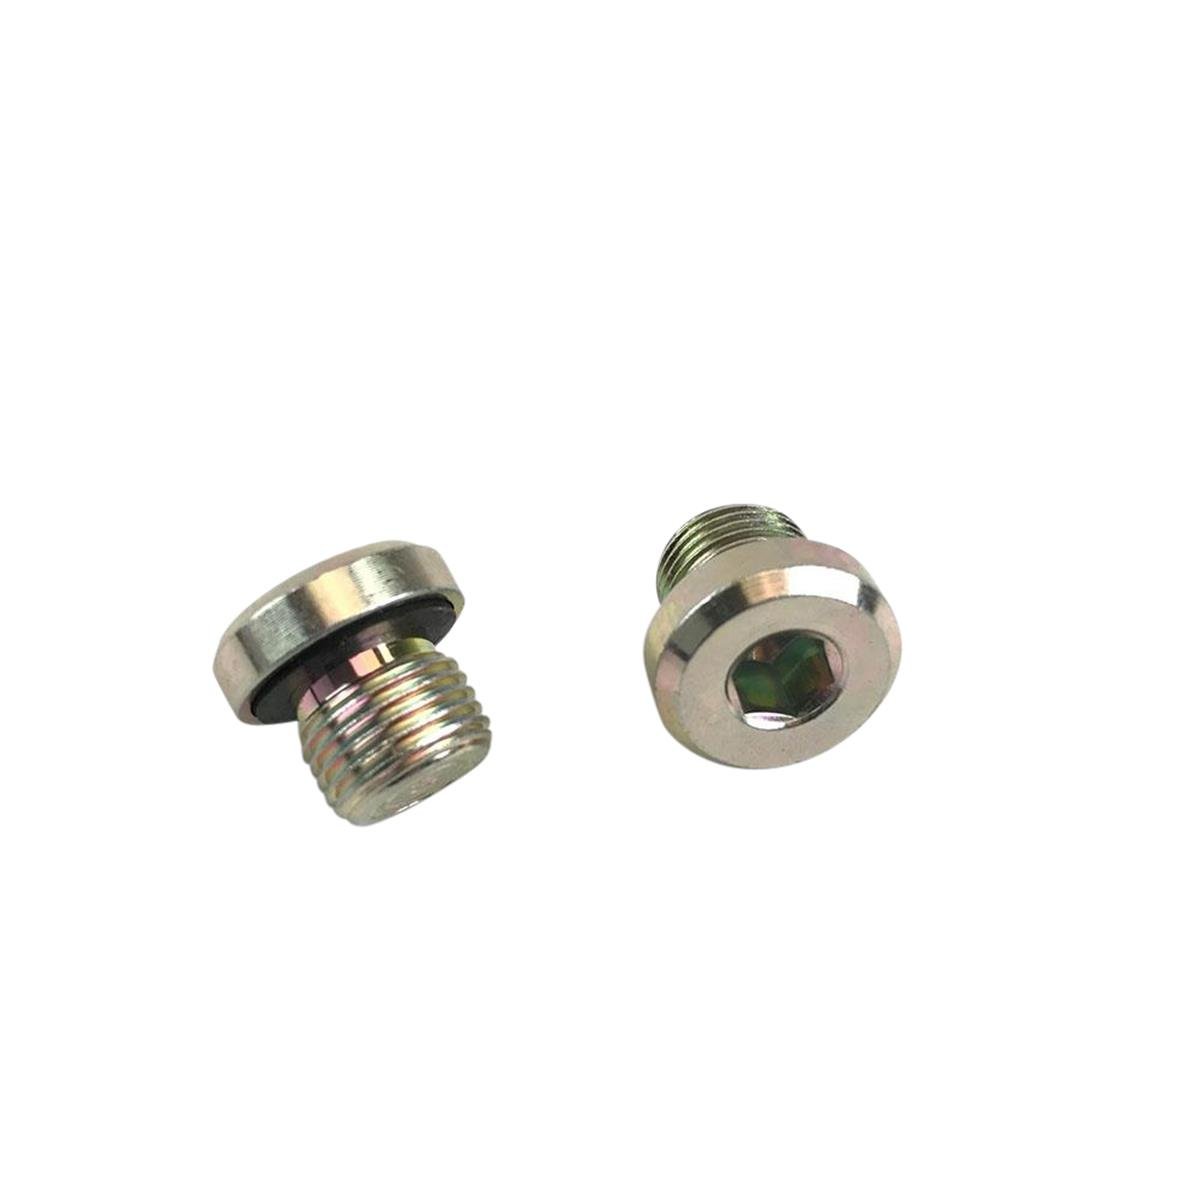 WP Bleed Screw  for shock absorber